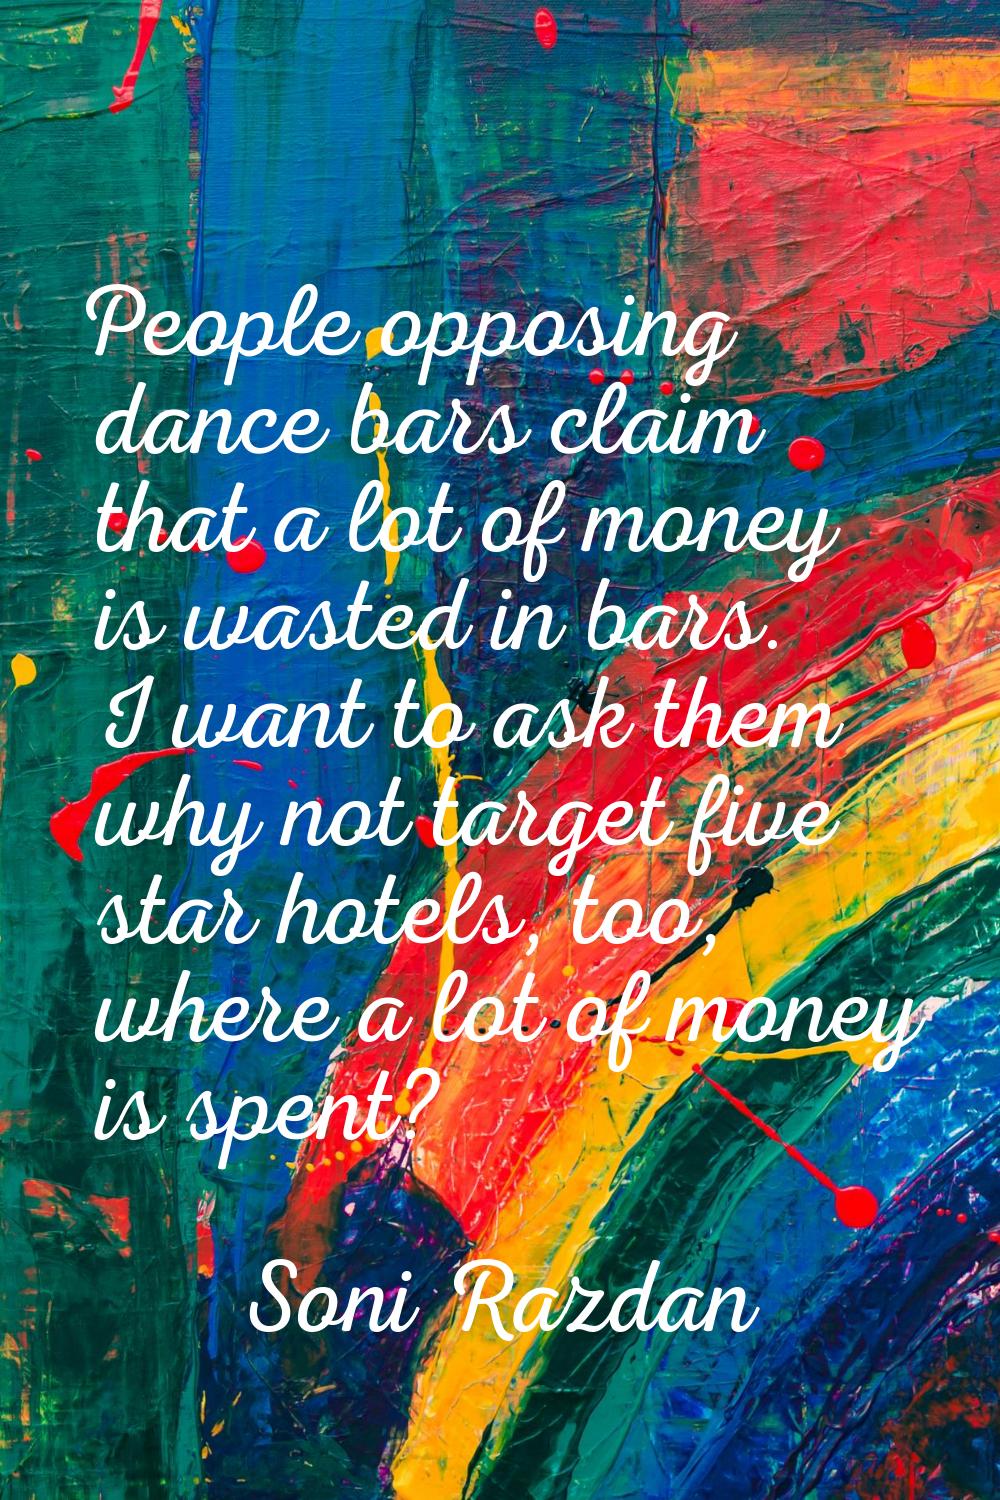 People opposing dance bars claim that a lot of money is wasted in bars. I want to ask them why not 